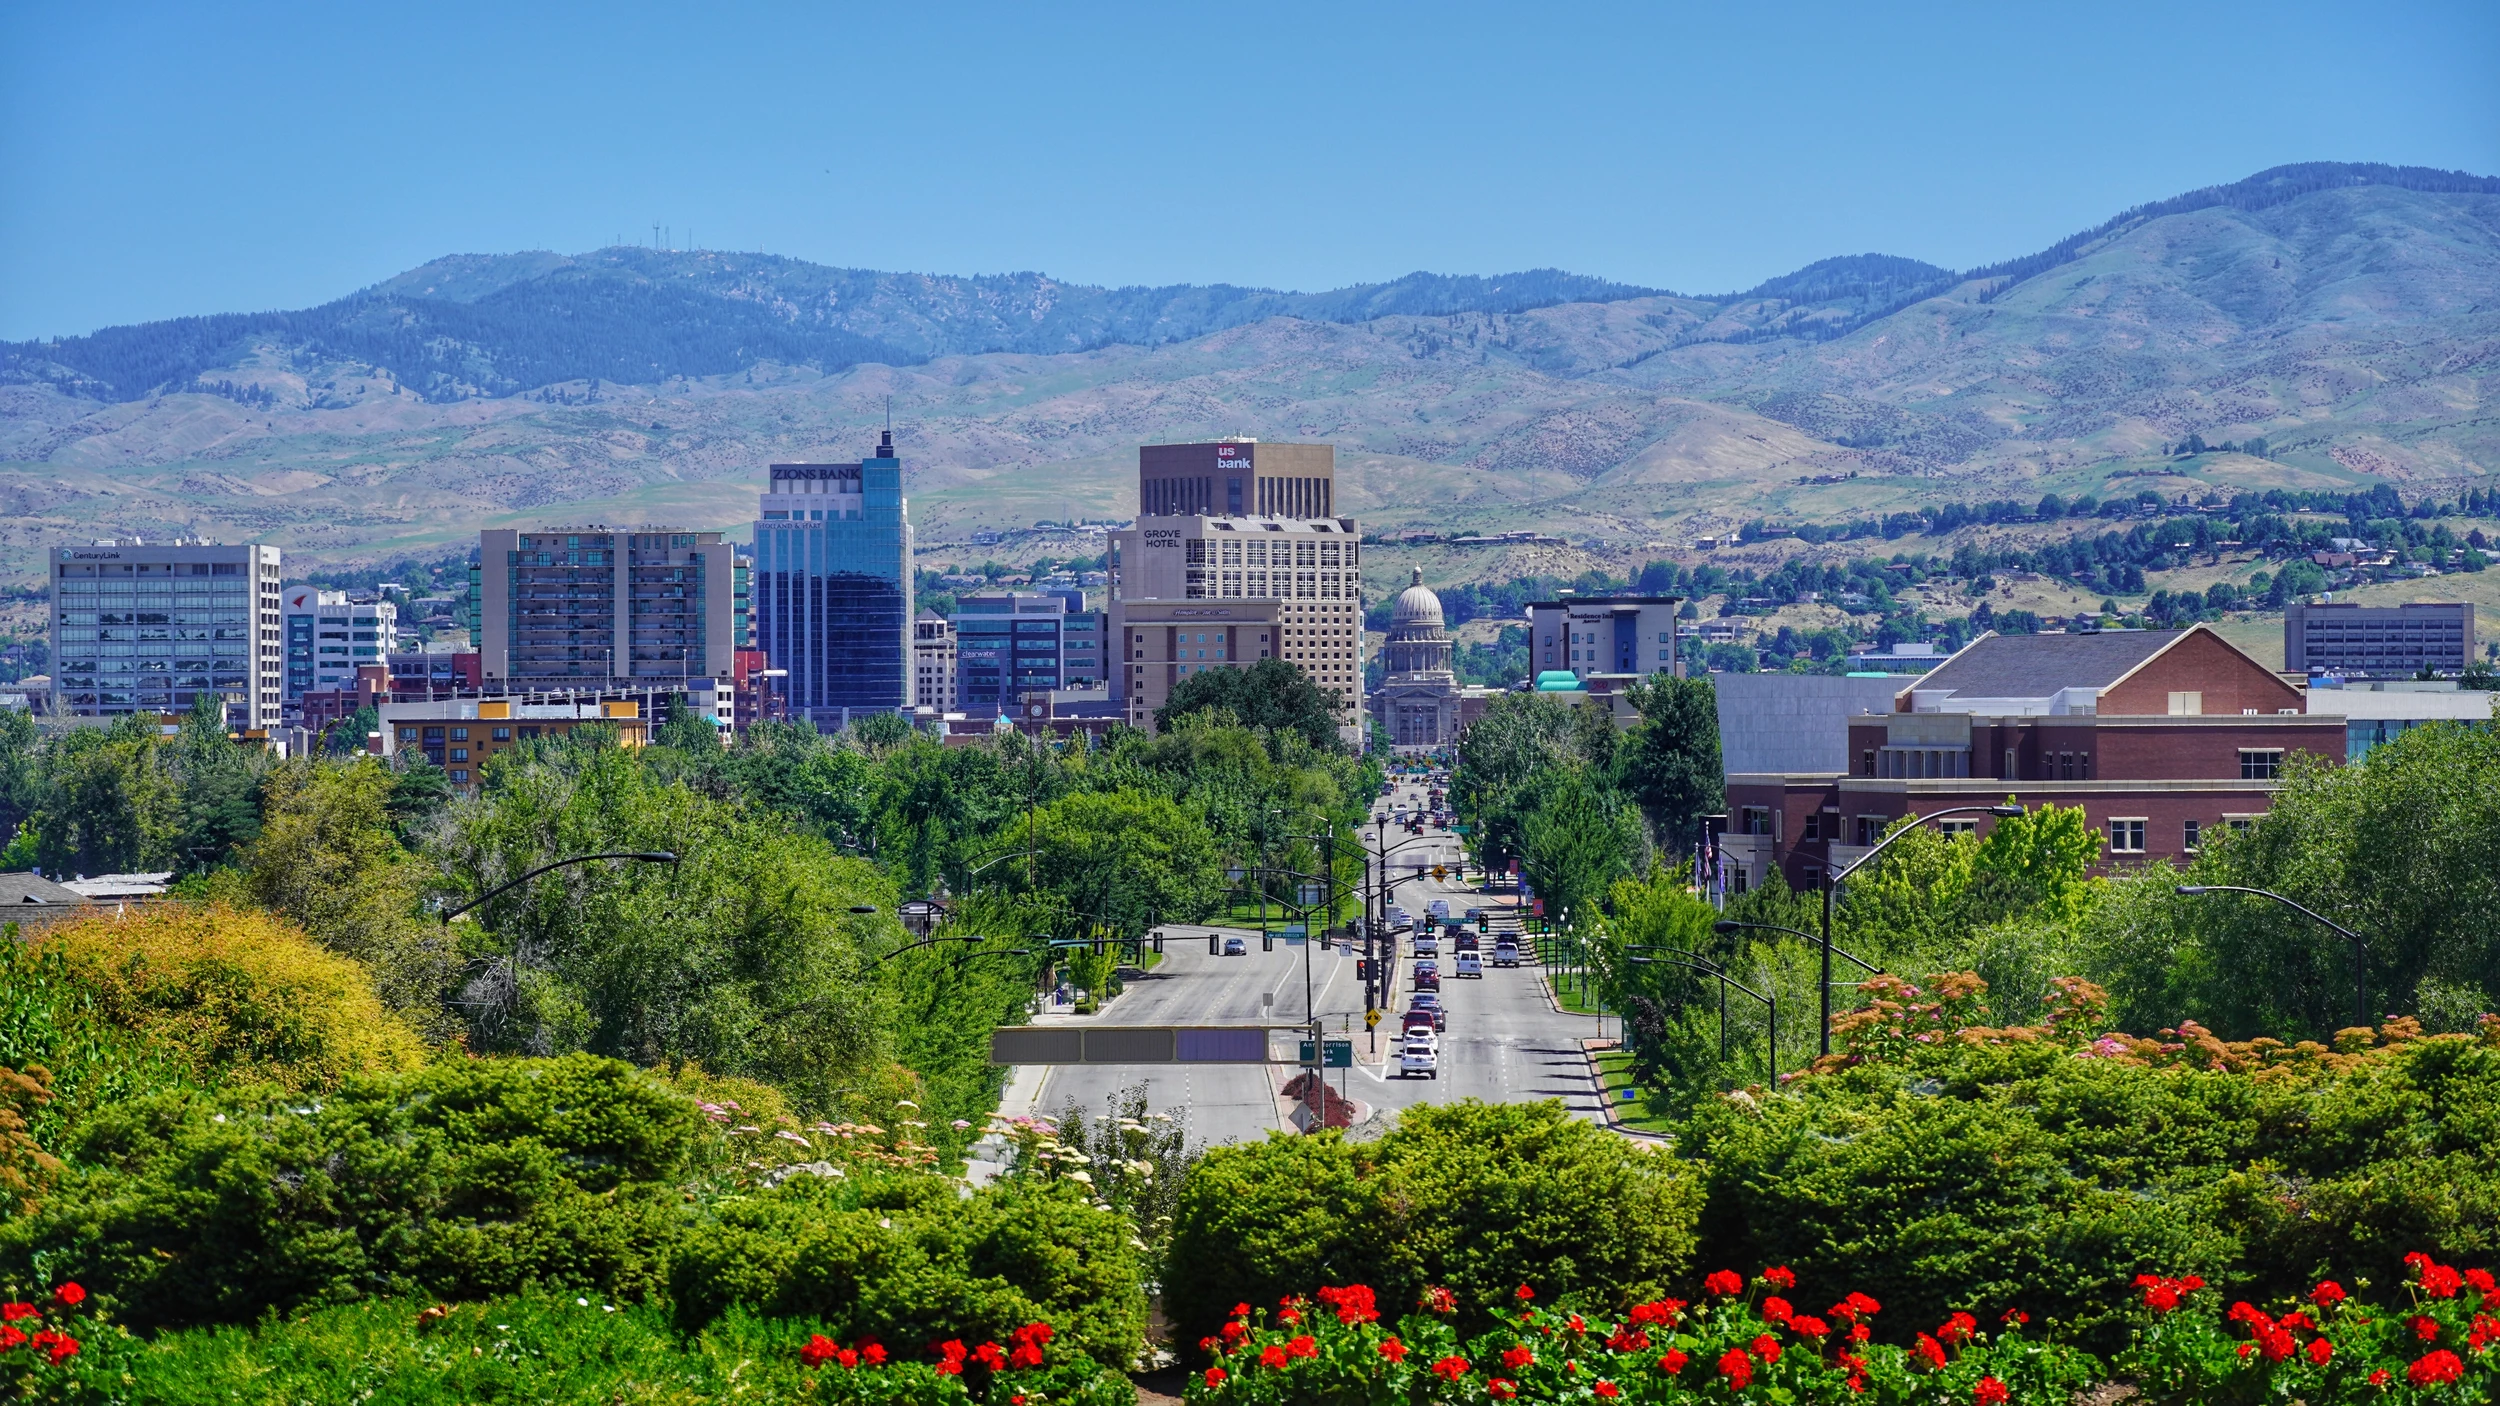 Boise's 100+ Weather Today is Scorching Hot & Setting Records